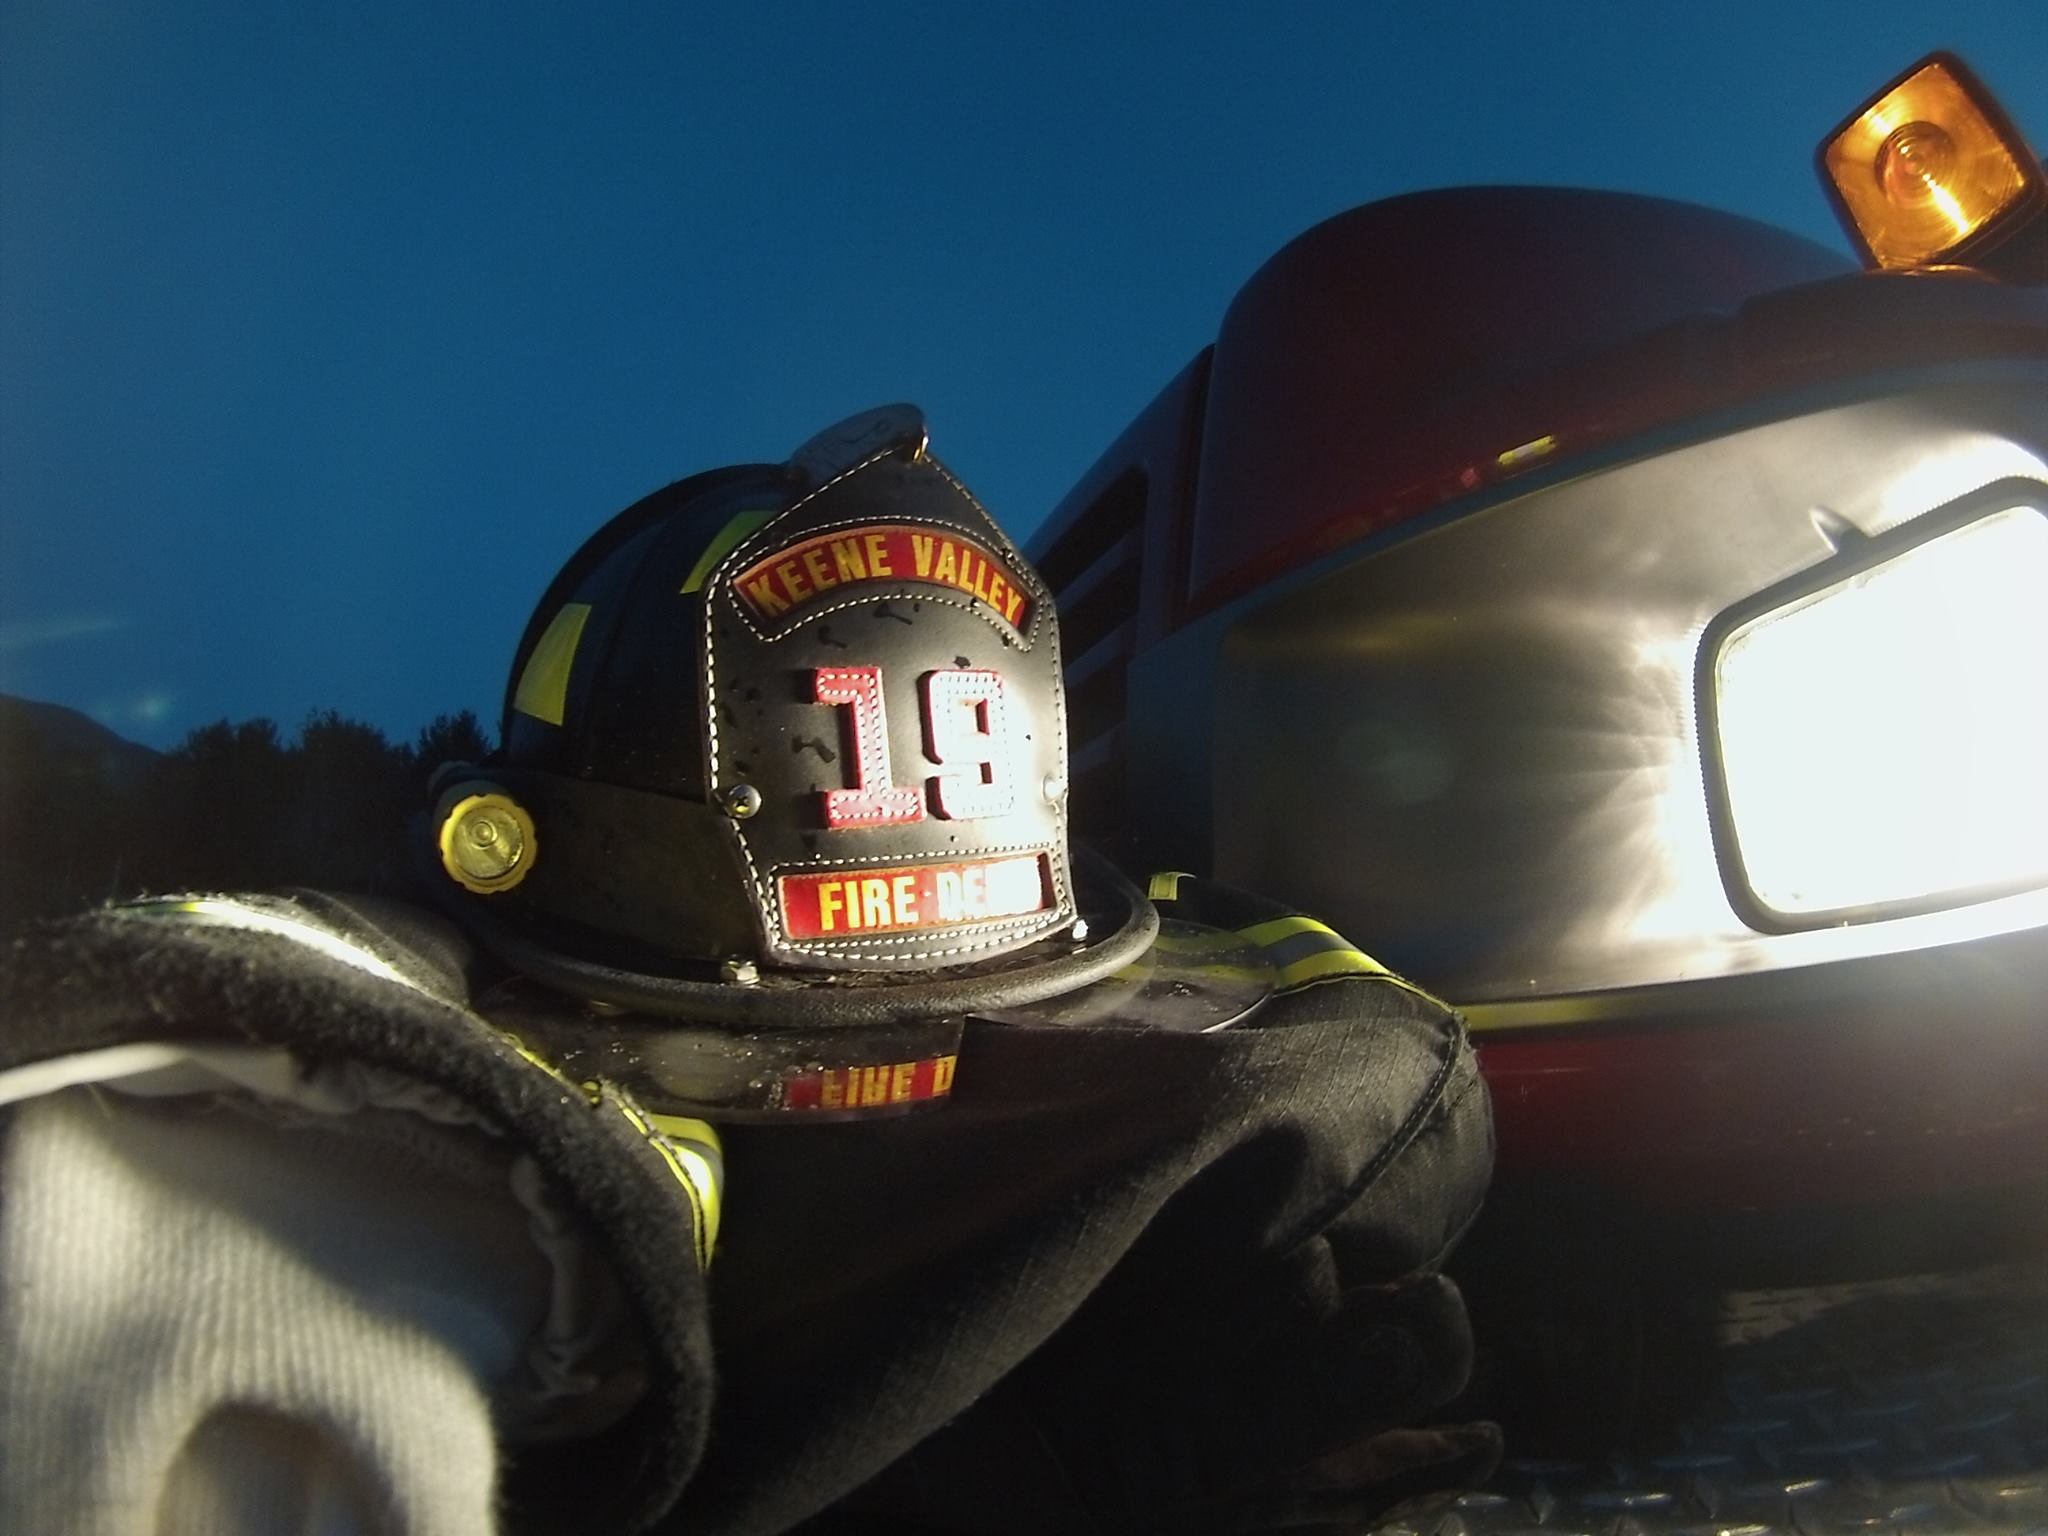 Helmet and turnout gear